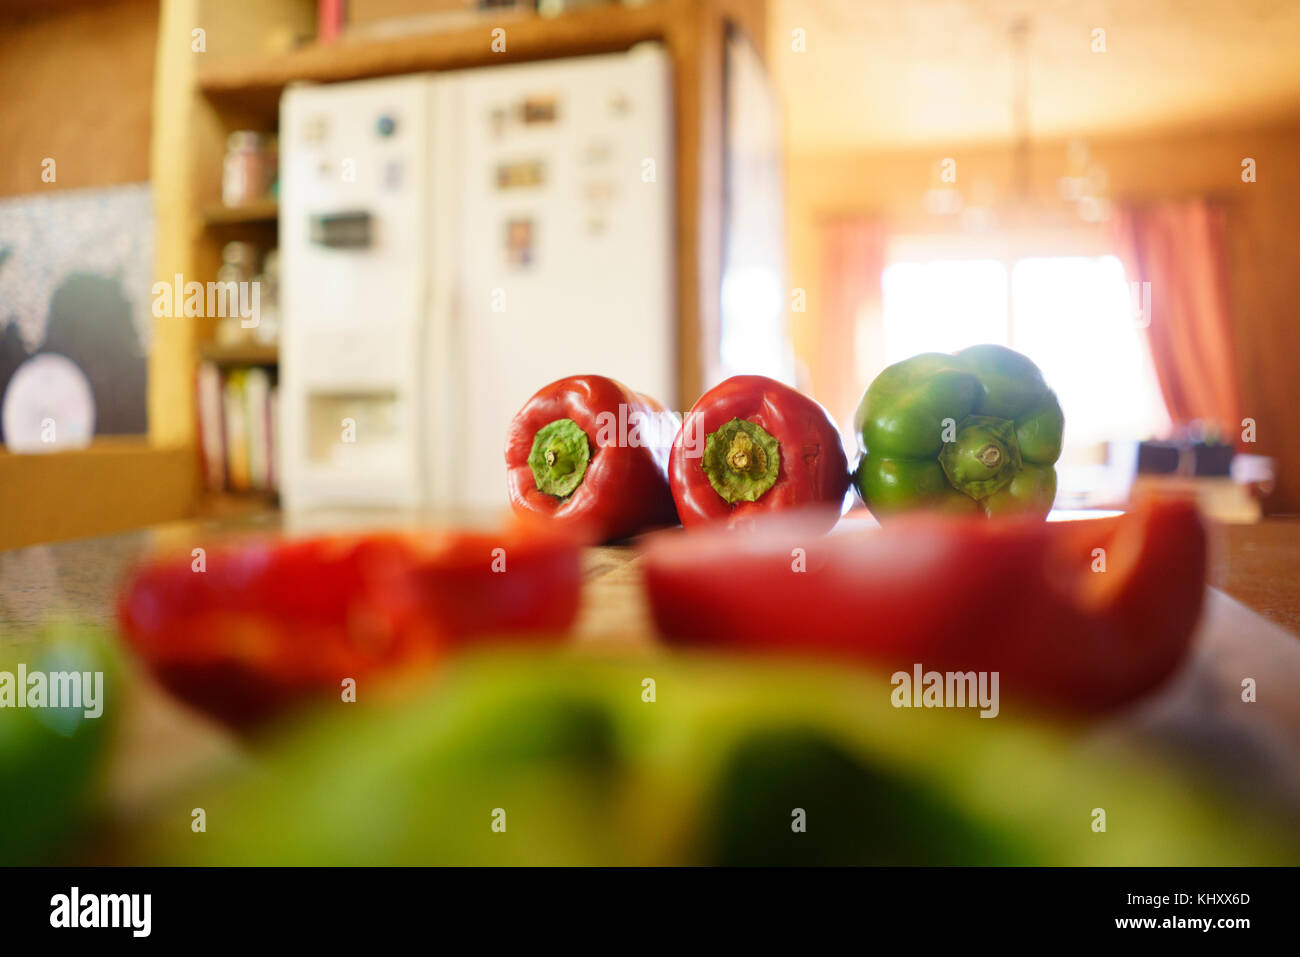 Whole and half red and green peppers on kitchen counter Stock Photo